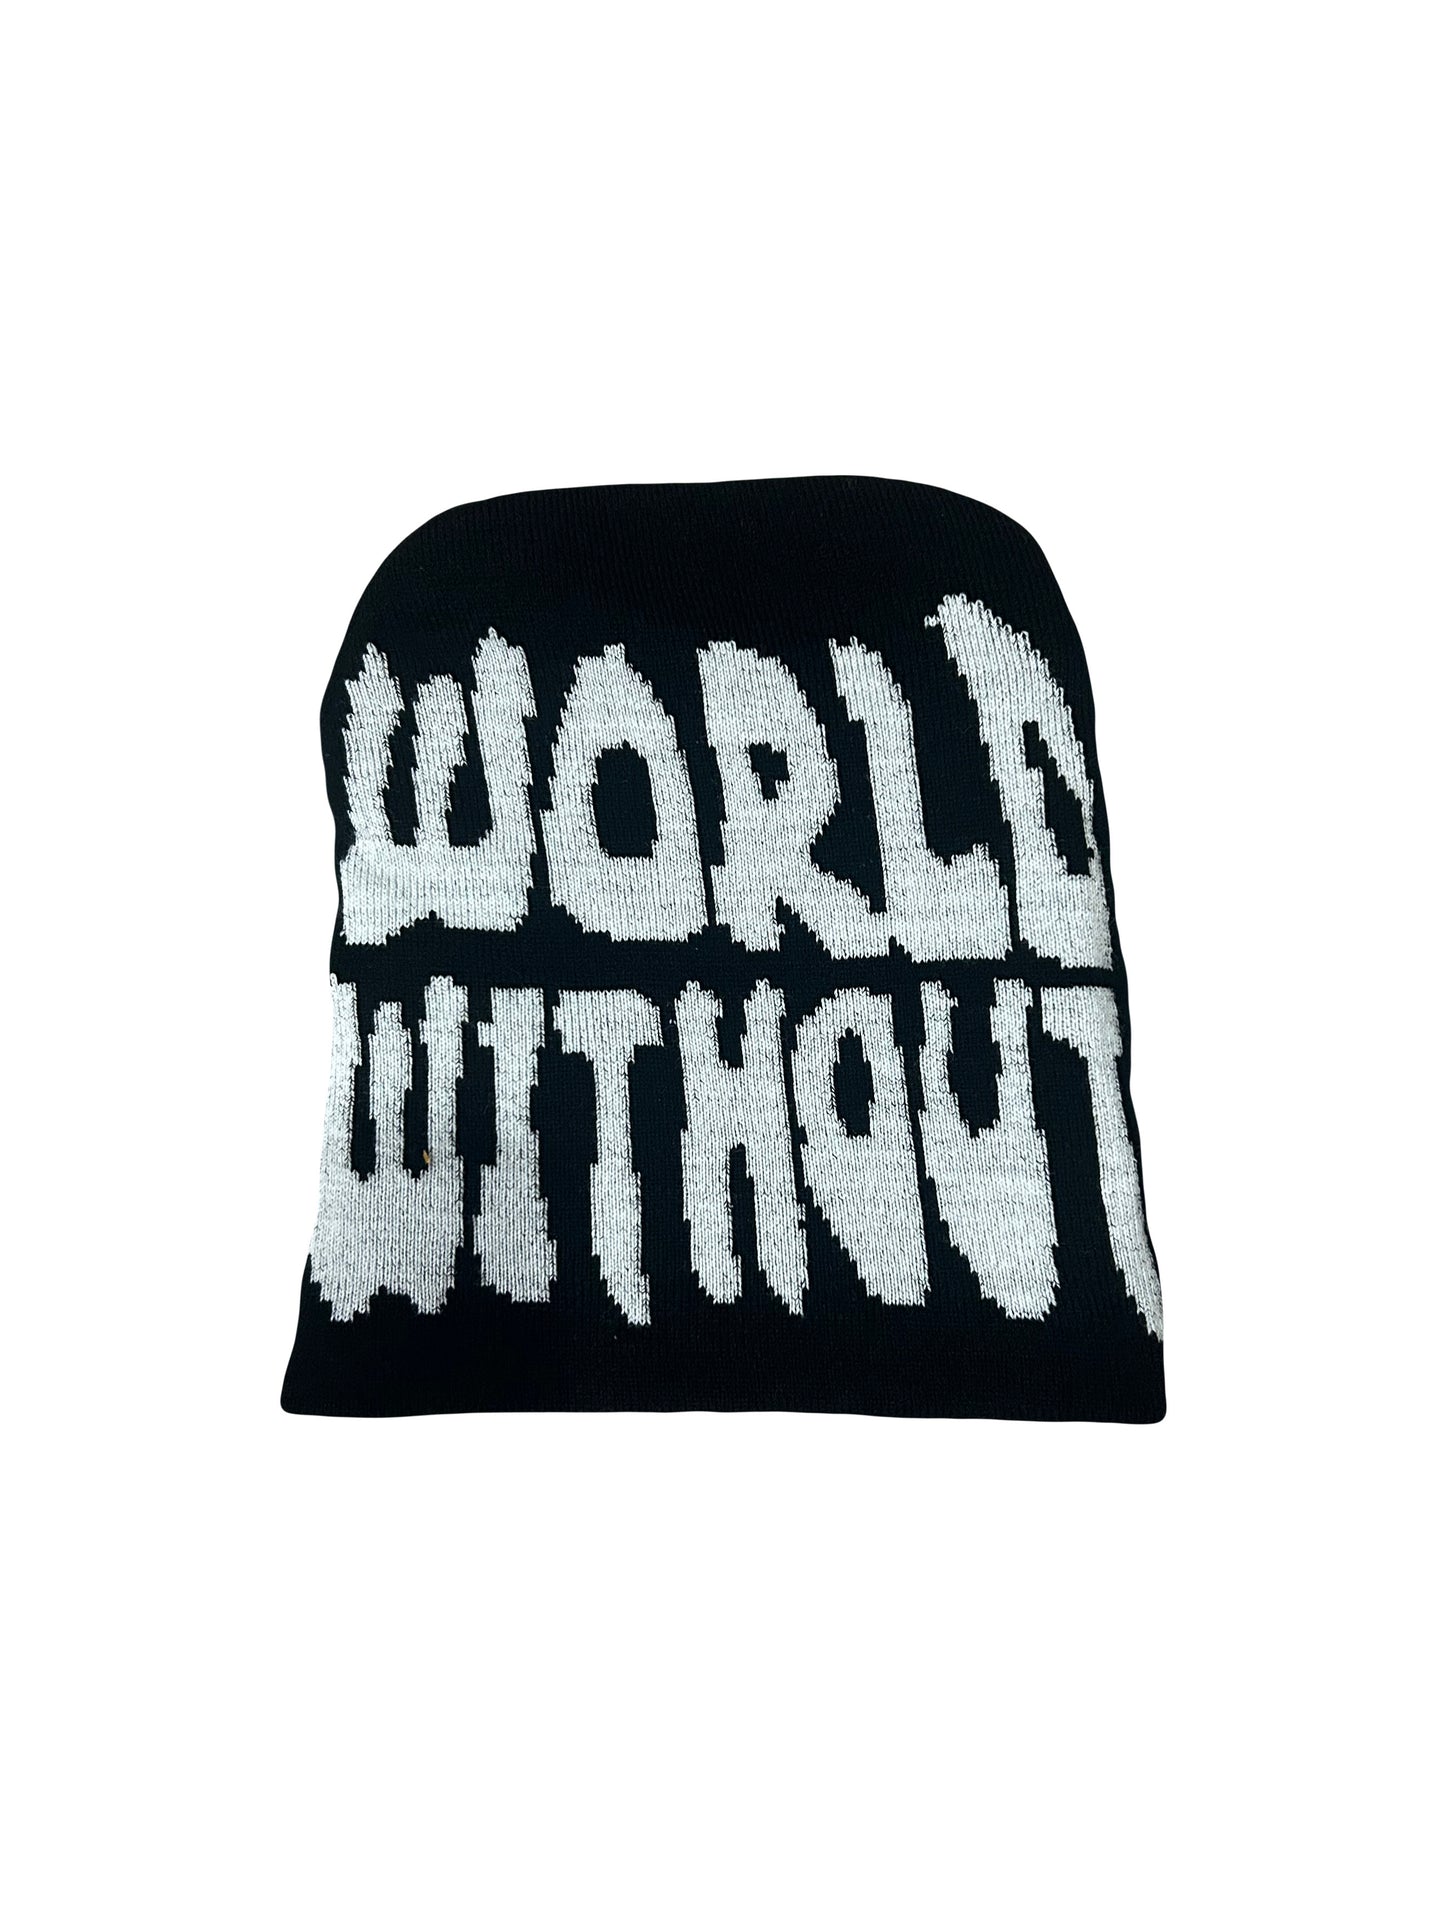 World Without Beanie